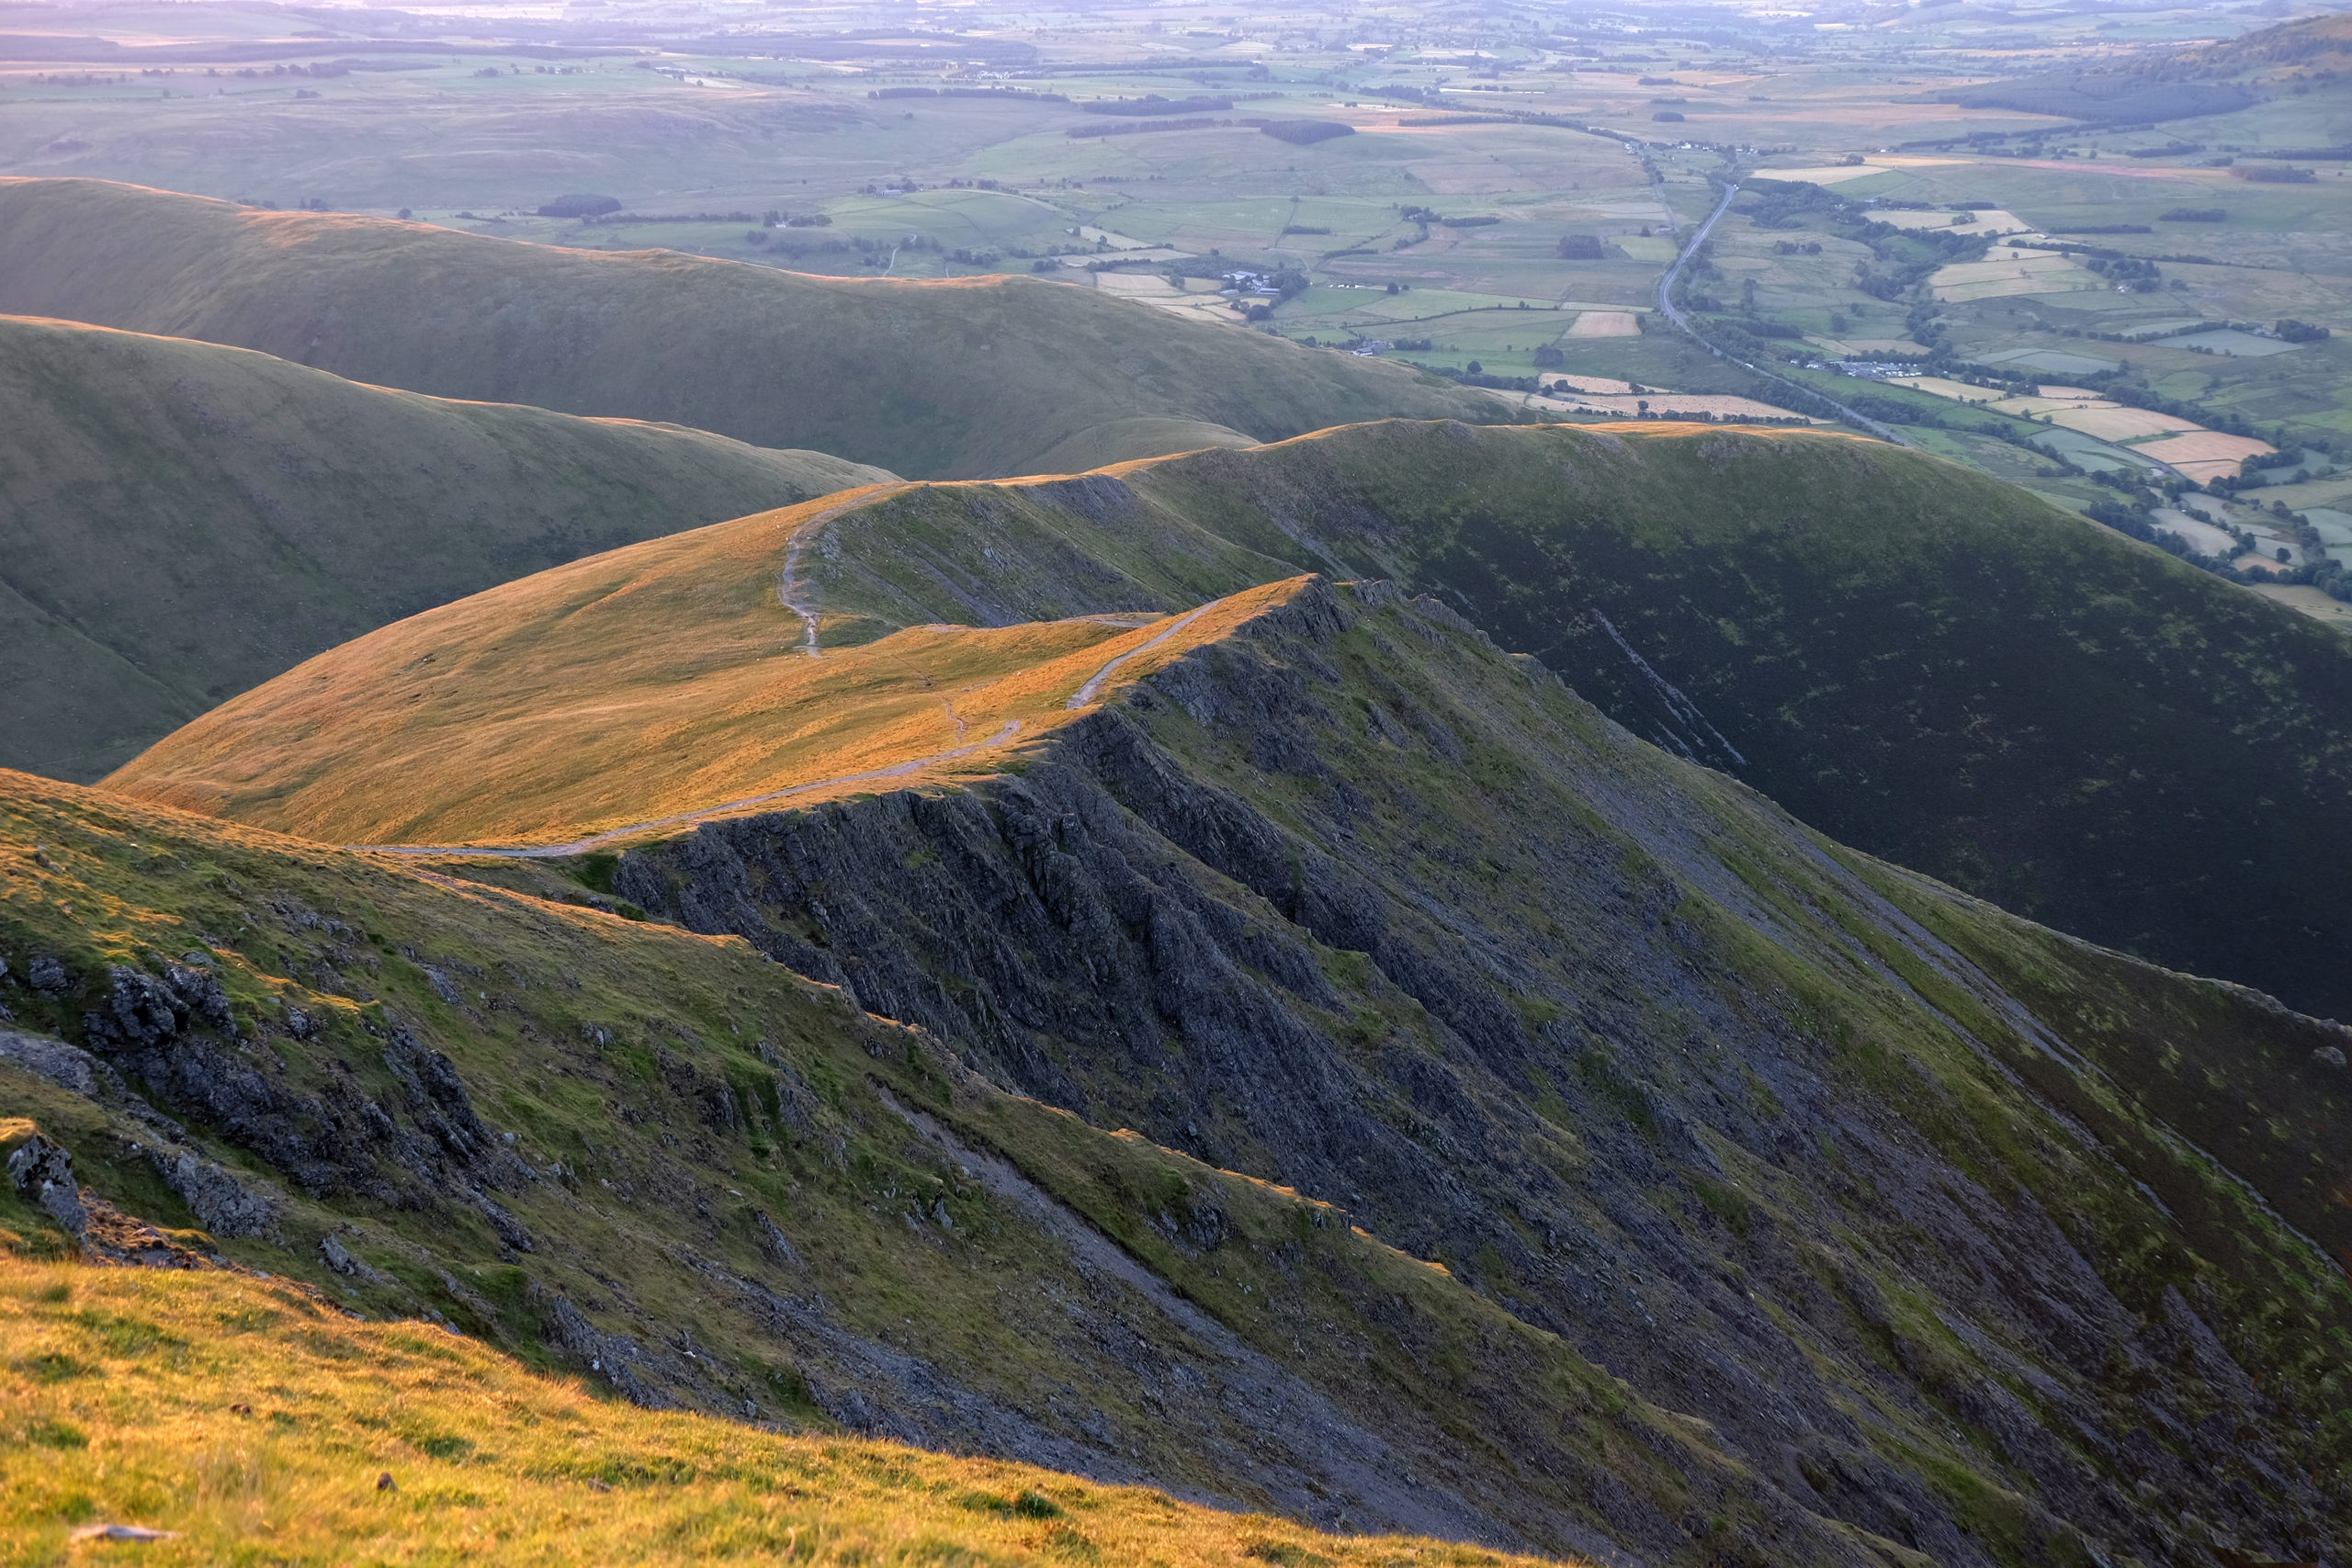 Scales Fell forms one of the easier approaches to Blencathra by Vivienne Crow